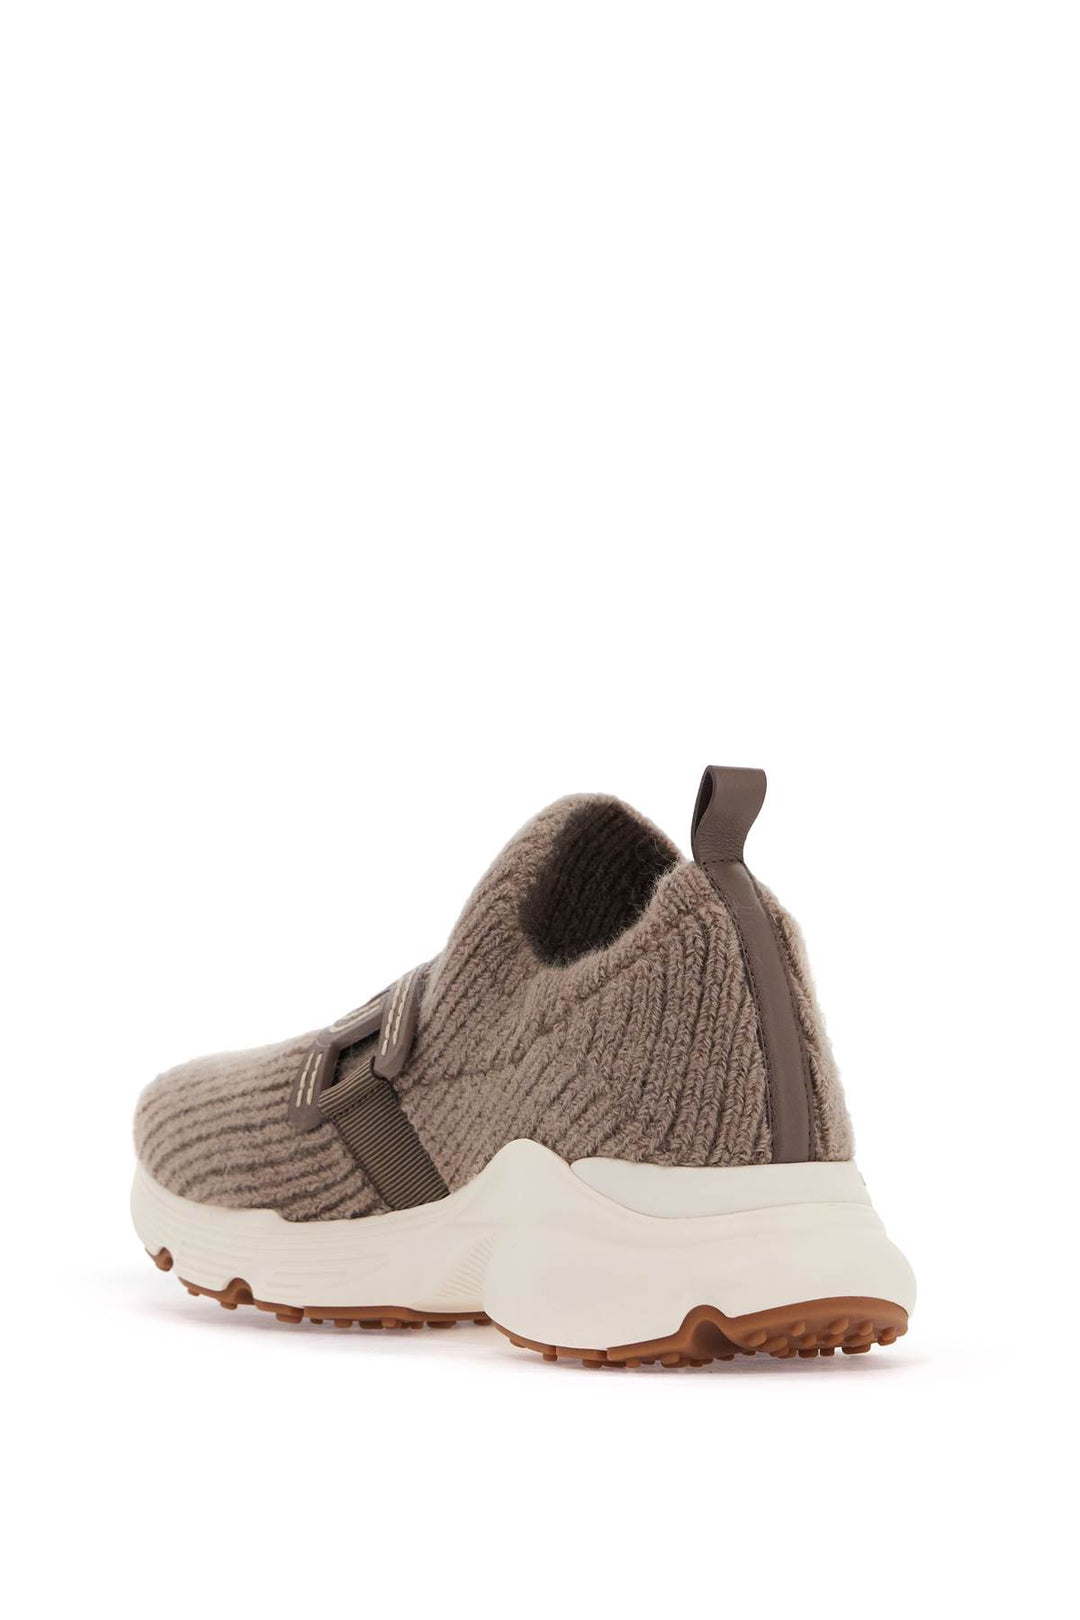 Tod's Knit Kate Sneakers   Grey